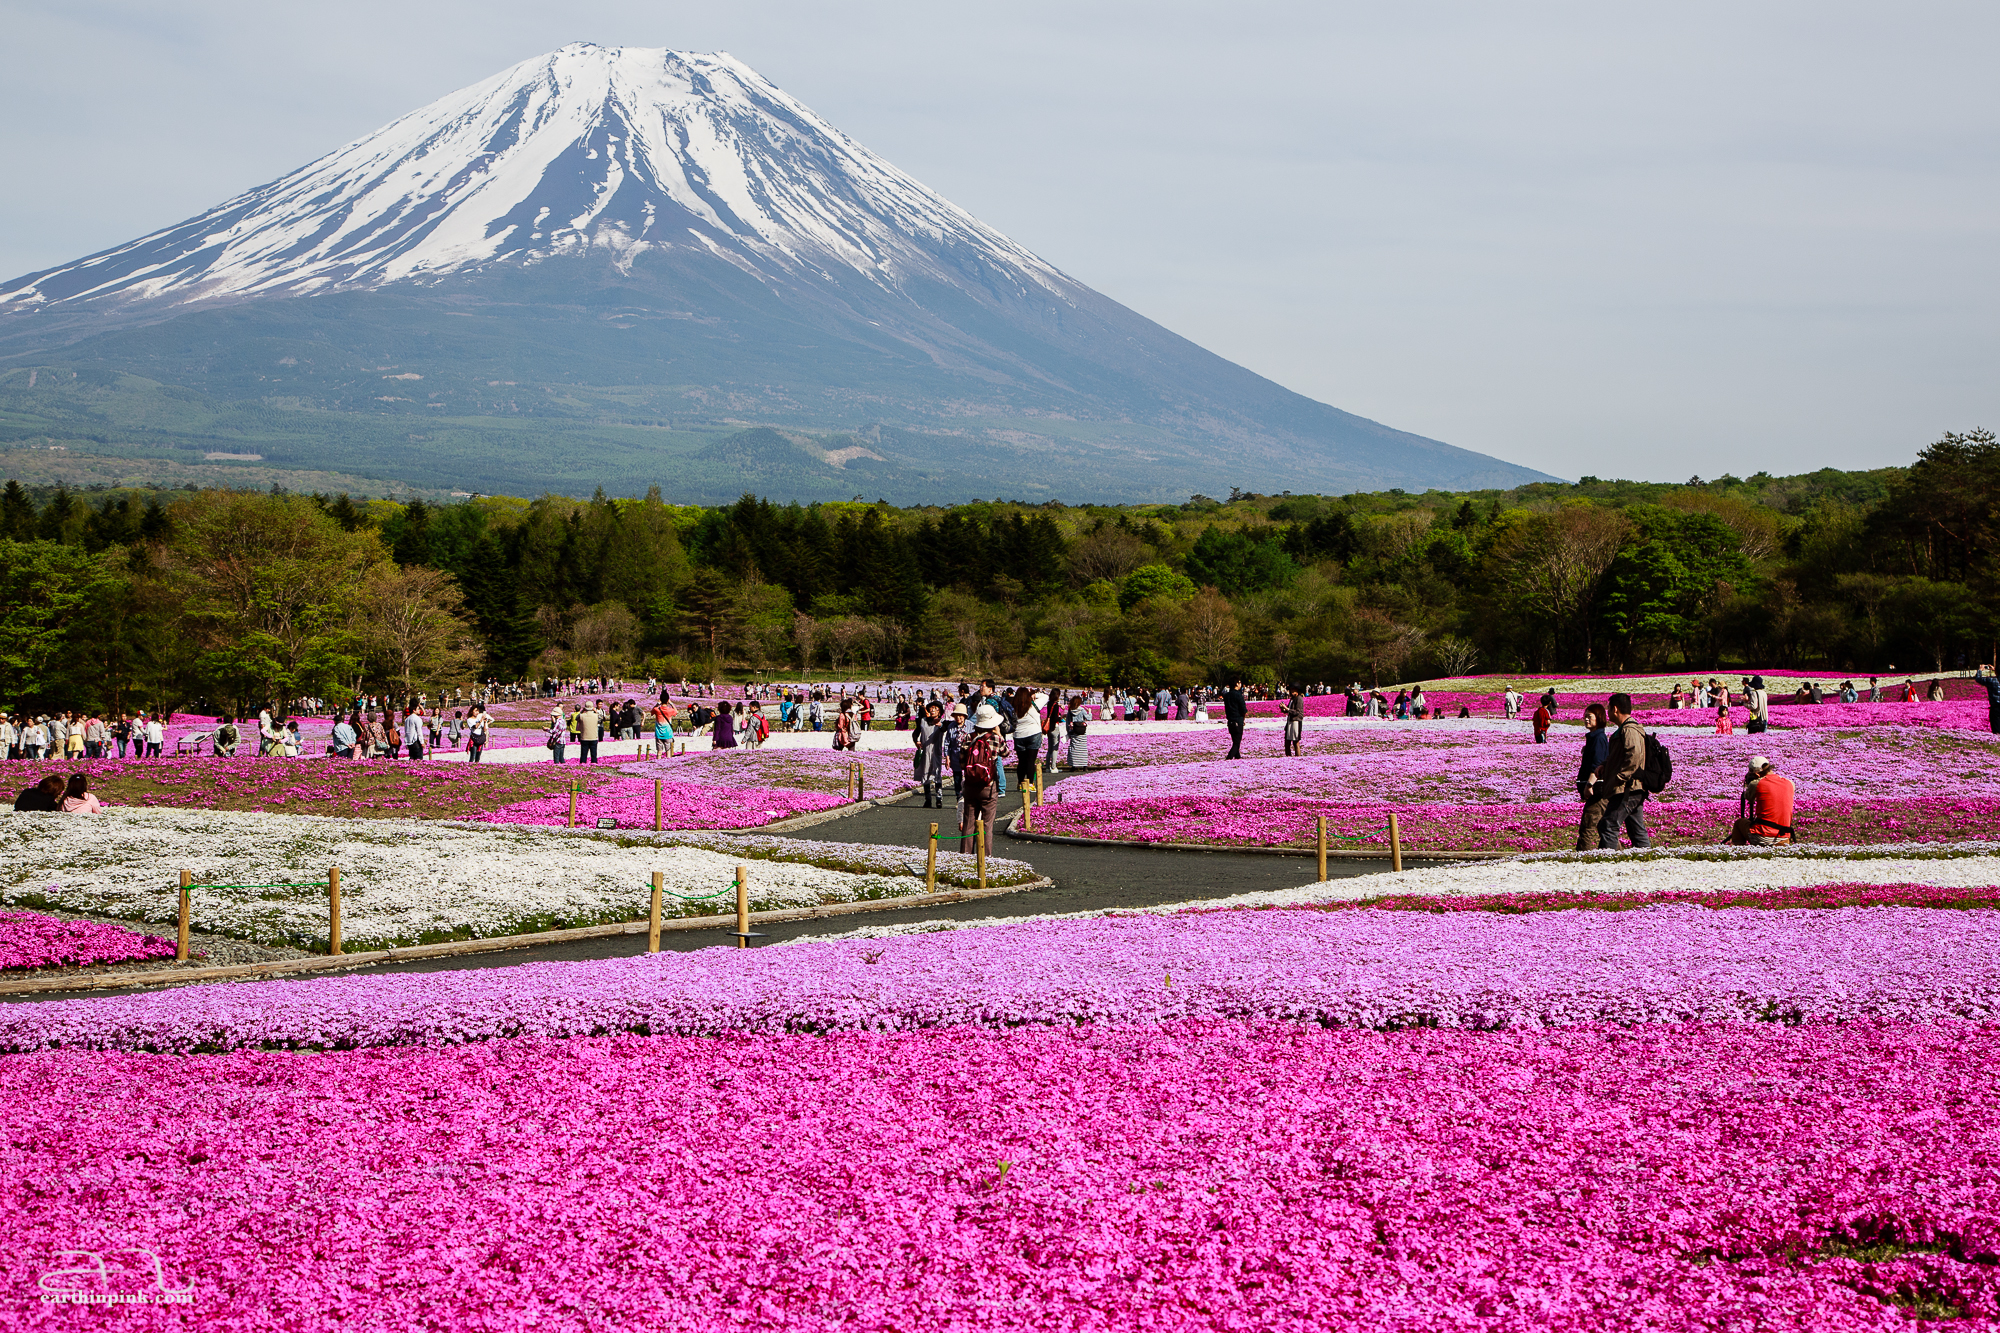 Few things are as representative of Japan as the iconic silhouette of Fuji-san rising above an endless carpet of pink ground moss flowers at the Fuji Shibazakura Festival.